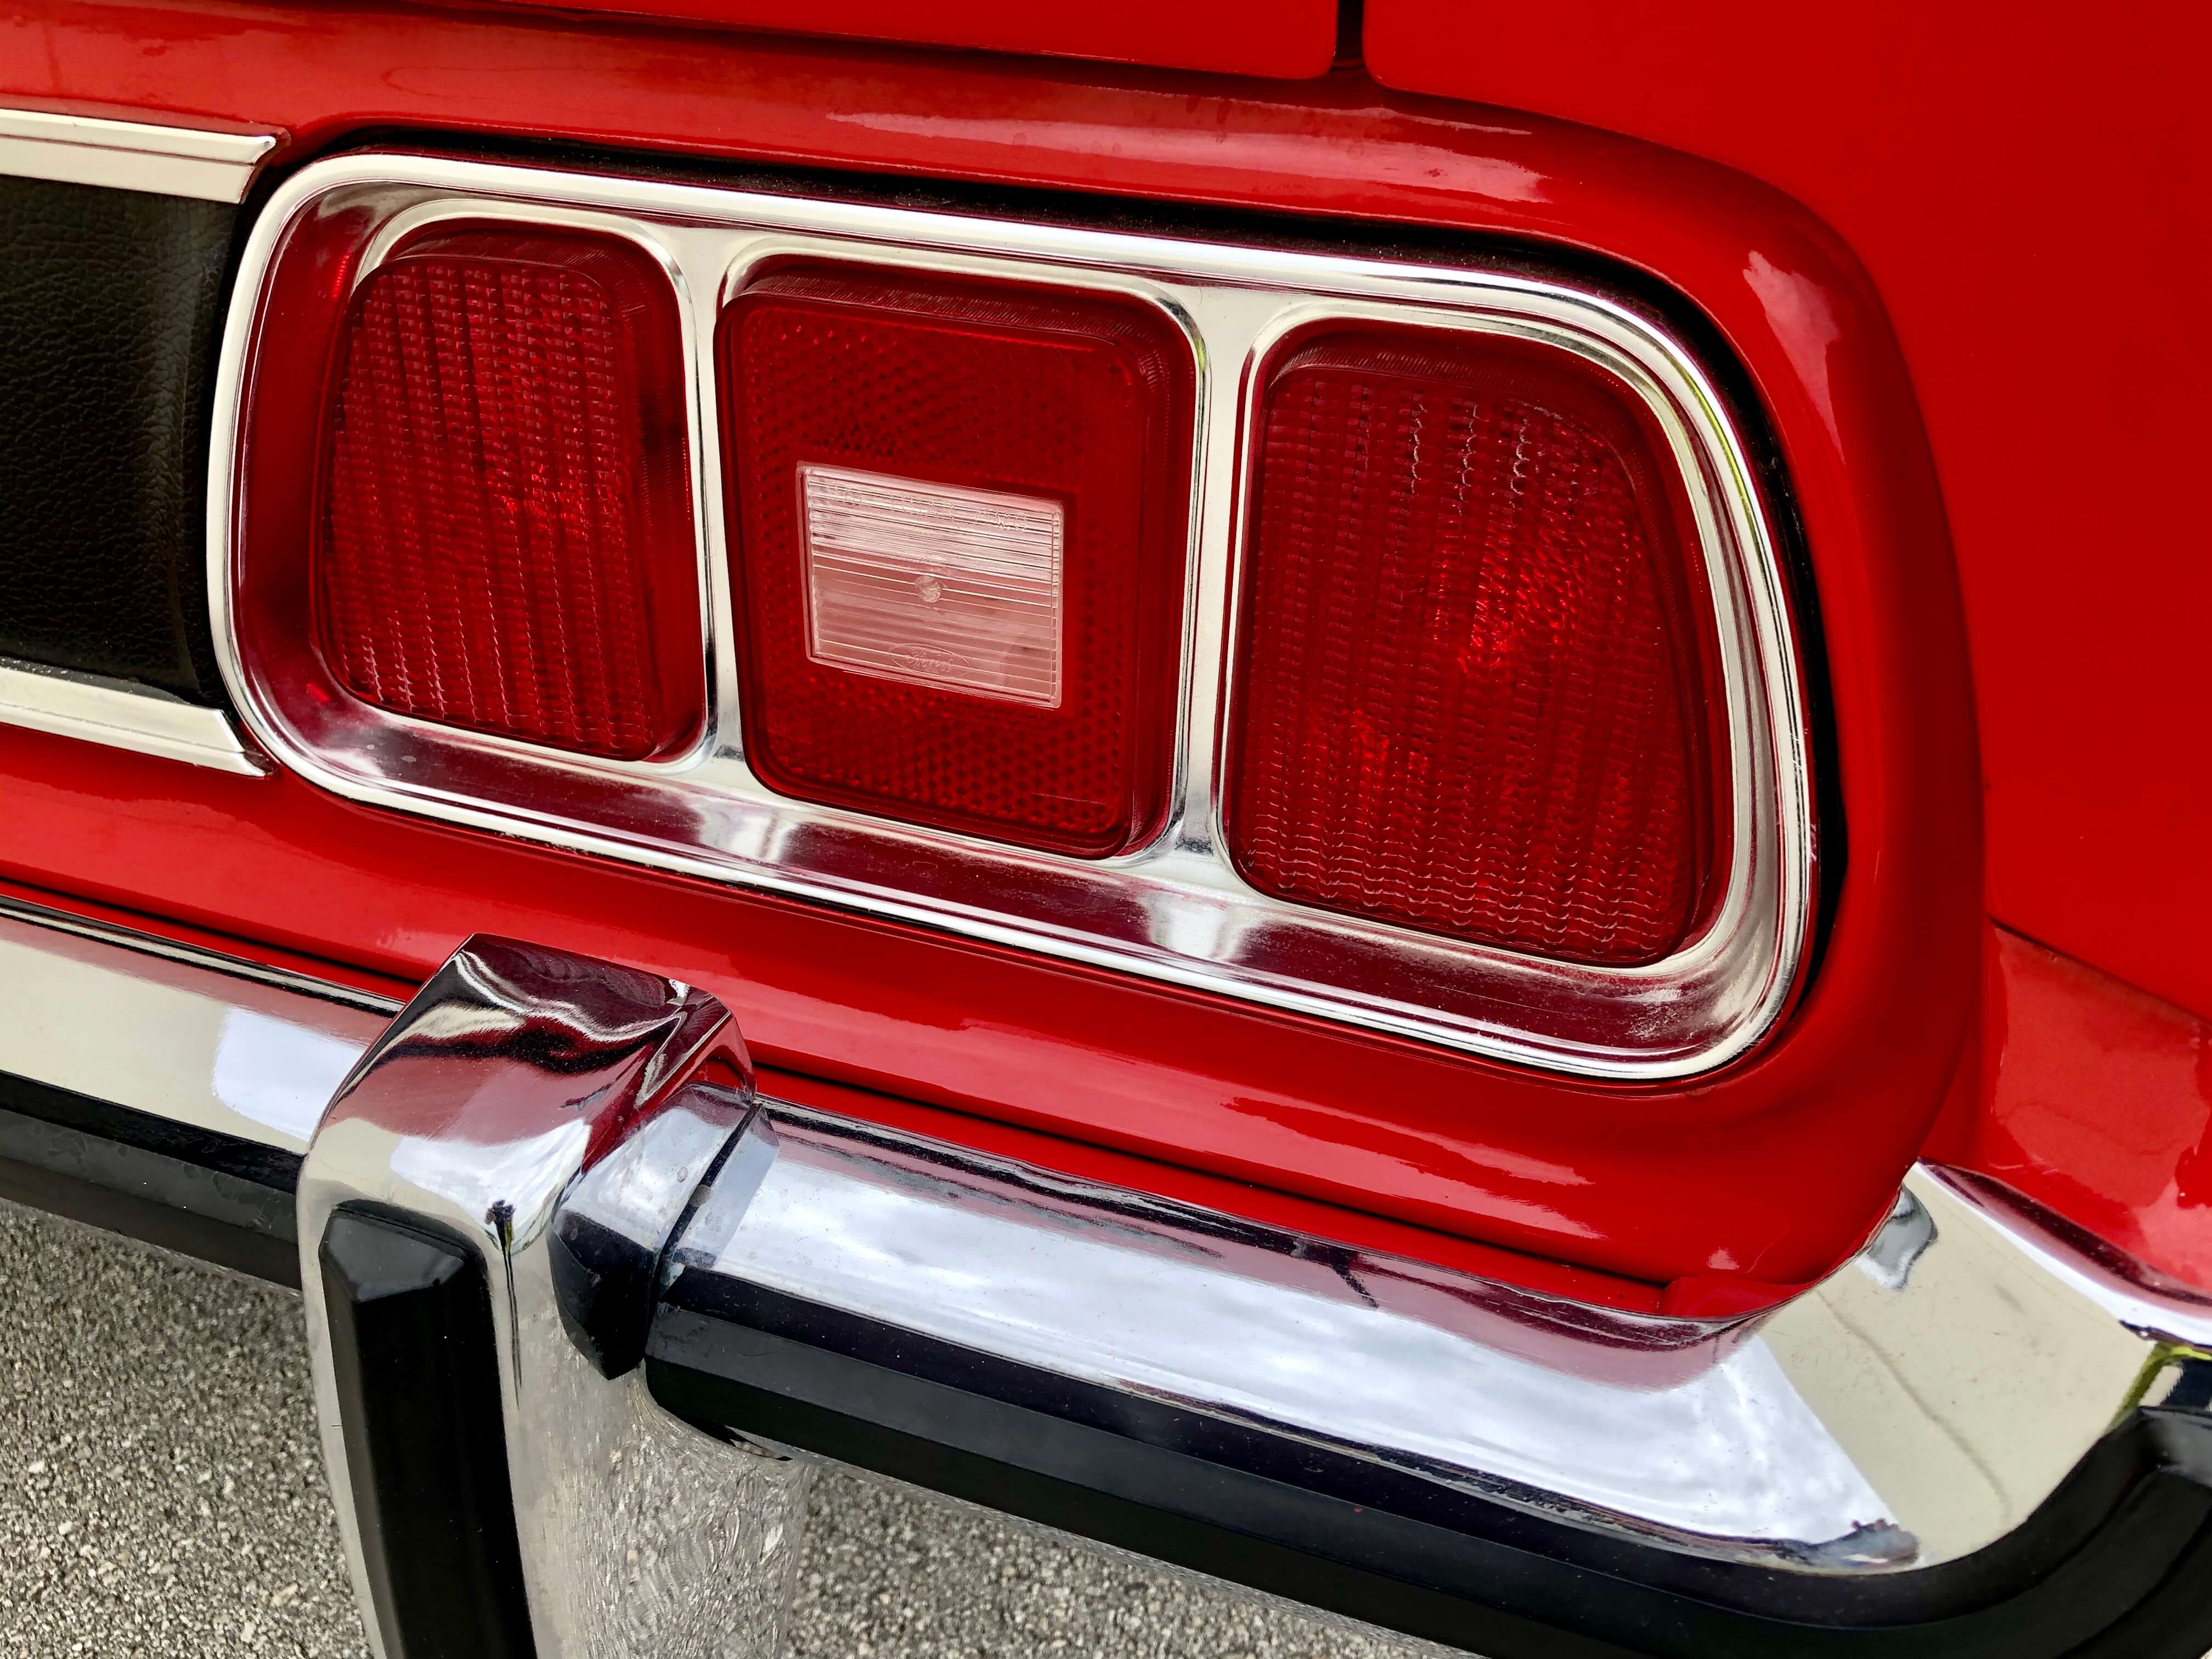 1973 Ford Mustang Convertible tail light